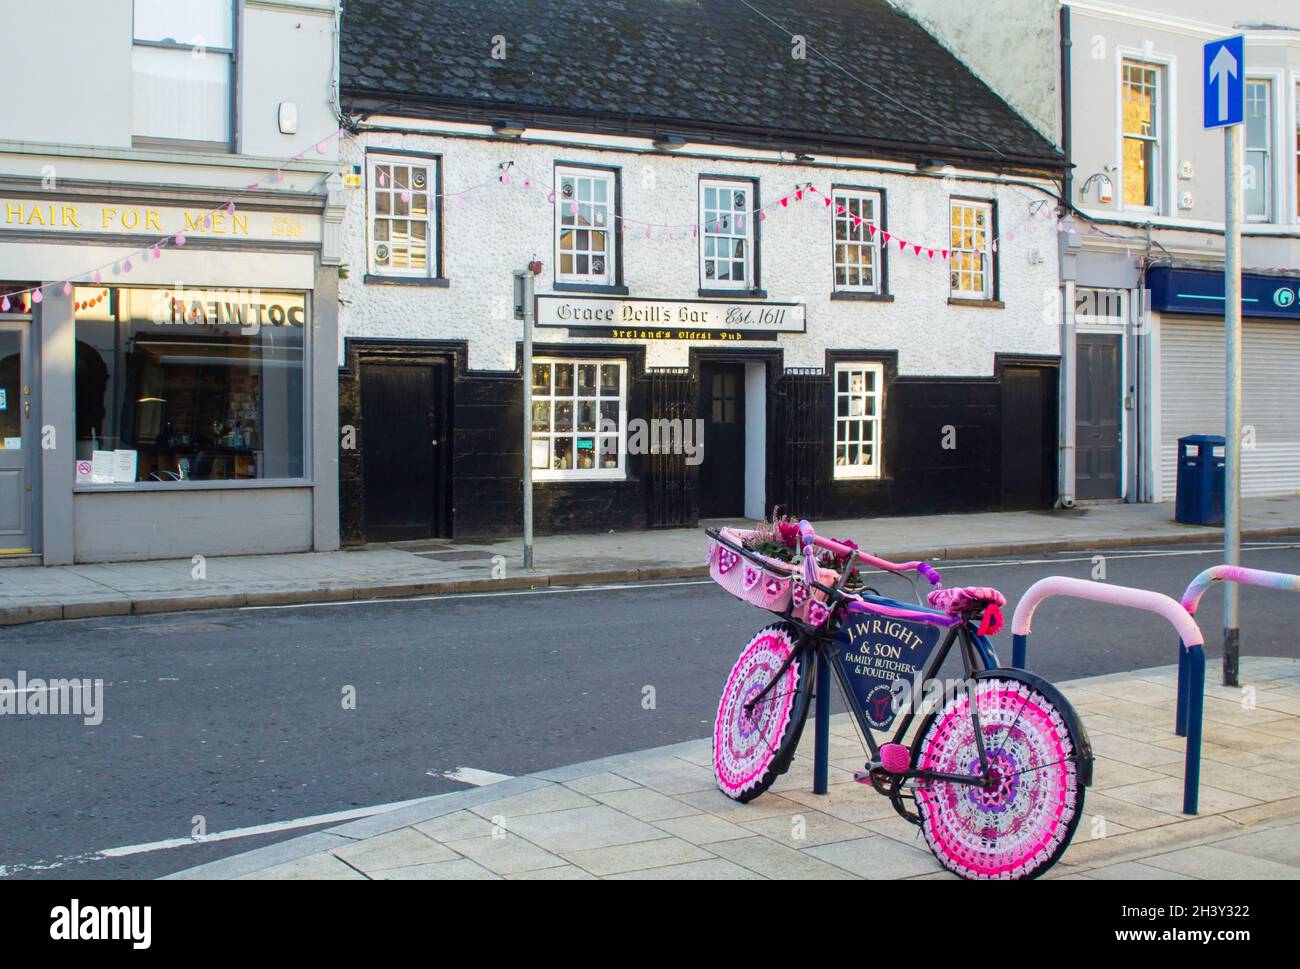 30 October 2021 Donaghadee County Down Northern Ireland A vintage buther's bike with crochet needle work used for advertising with Grace Neills Public Stock Photo